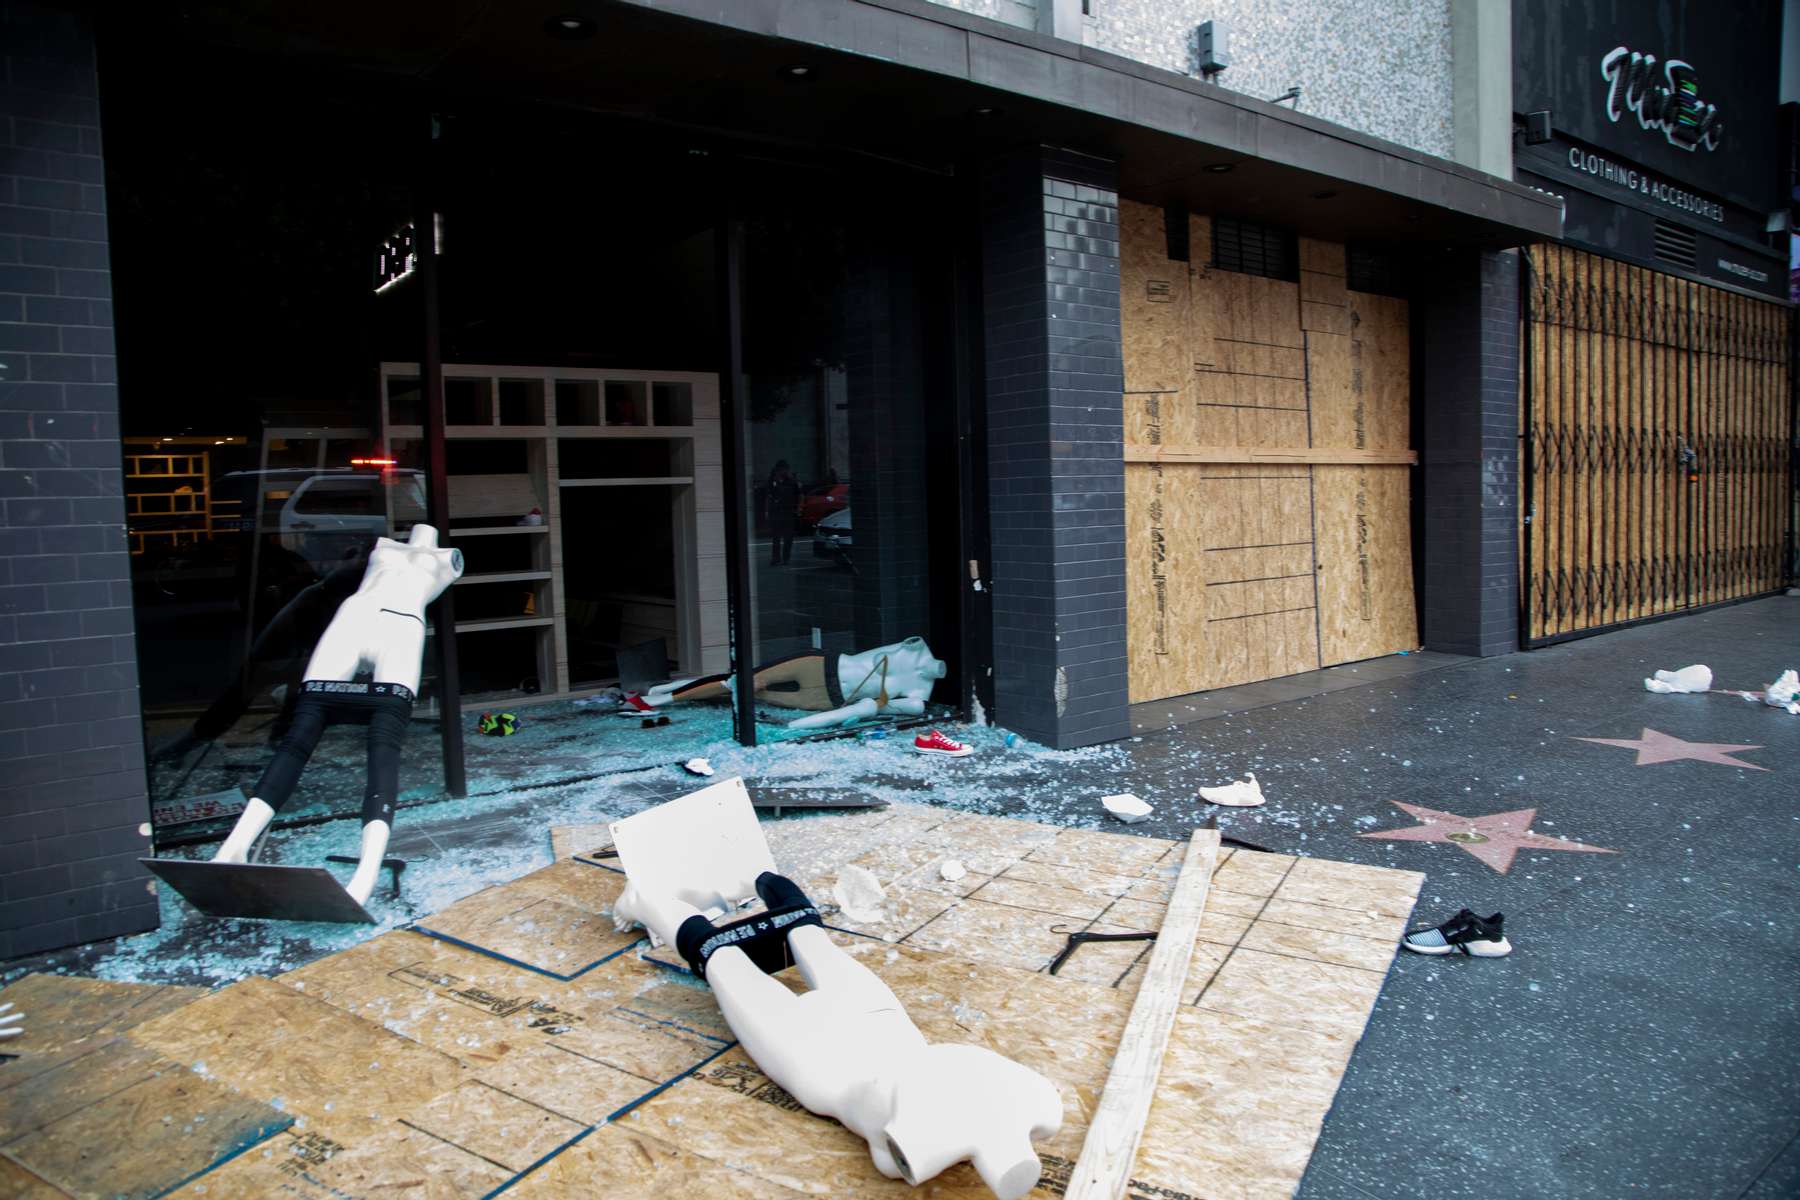 A looted store on Hollywood Boulevard, after a demonstration over the death of George Floyd, on June 1, 2020, in Los Angeles, California.